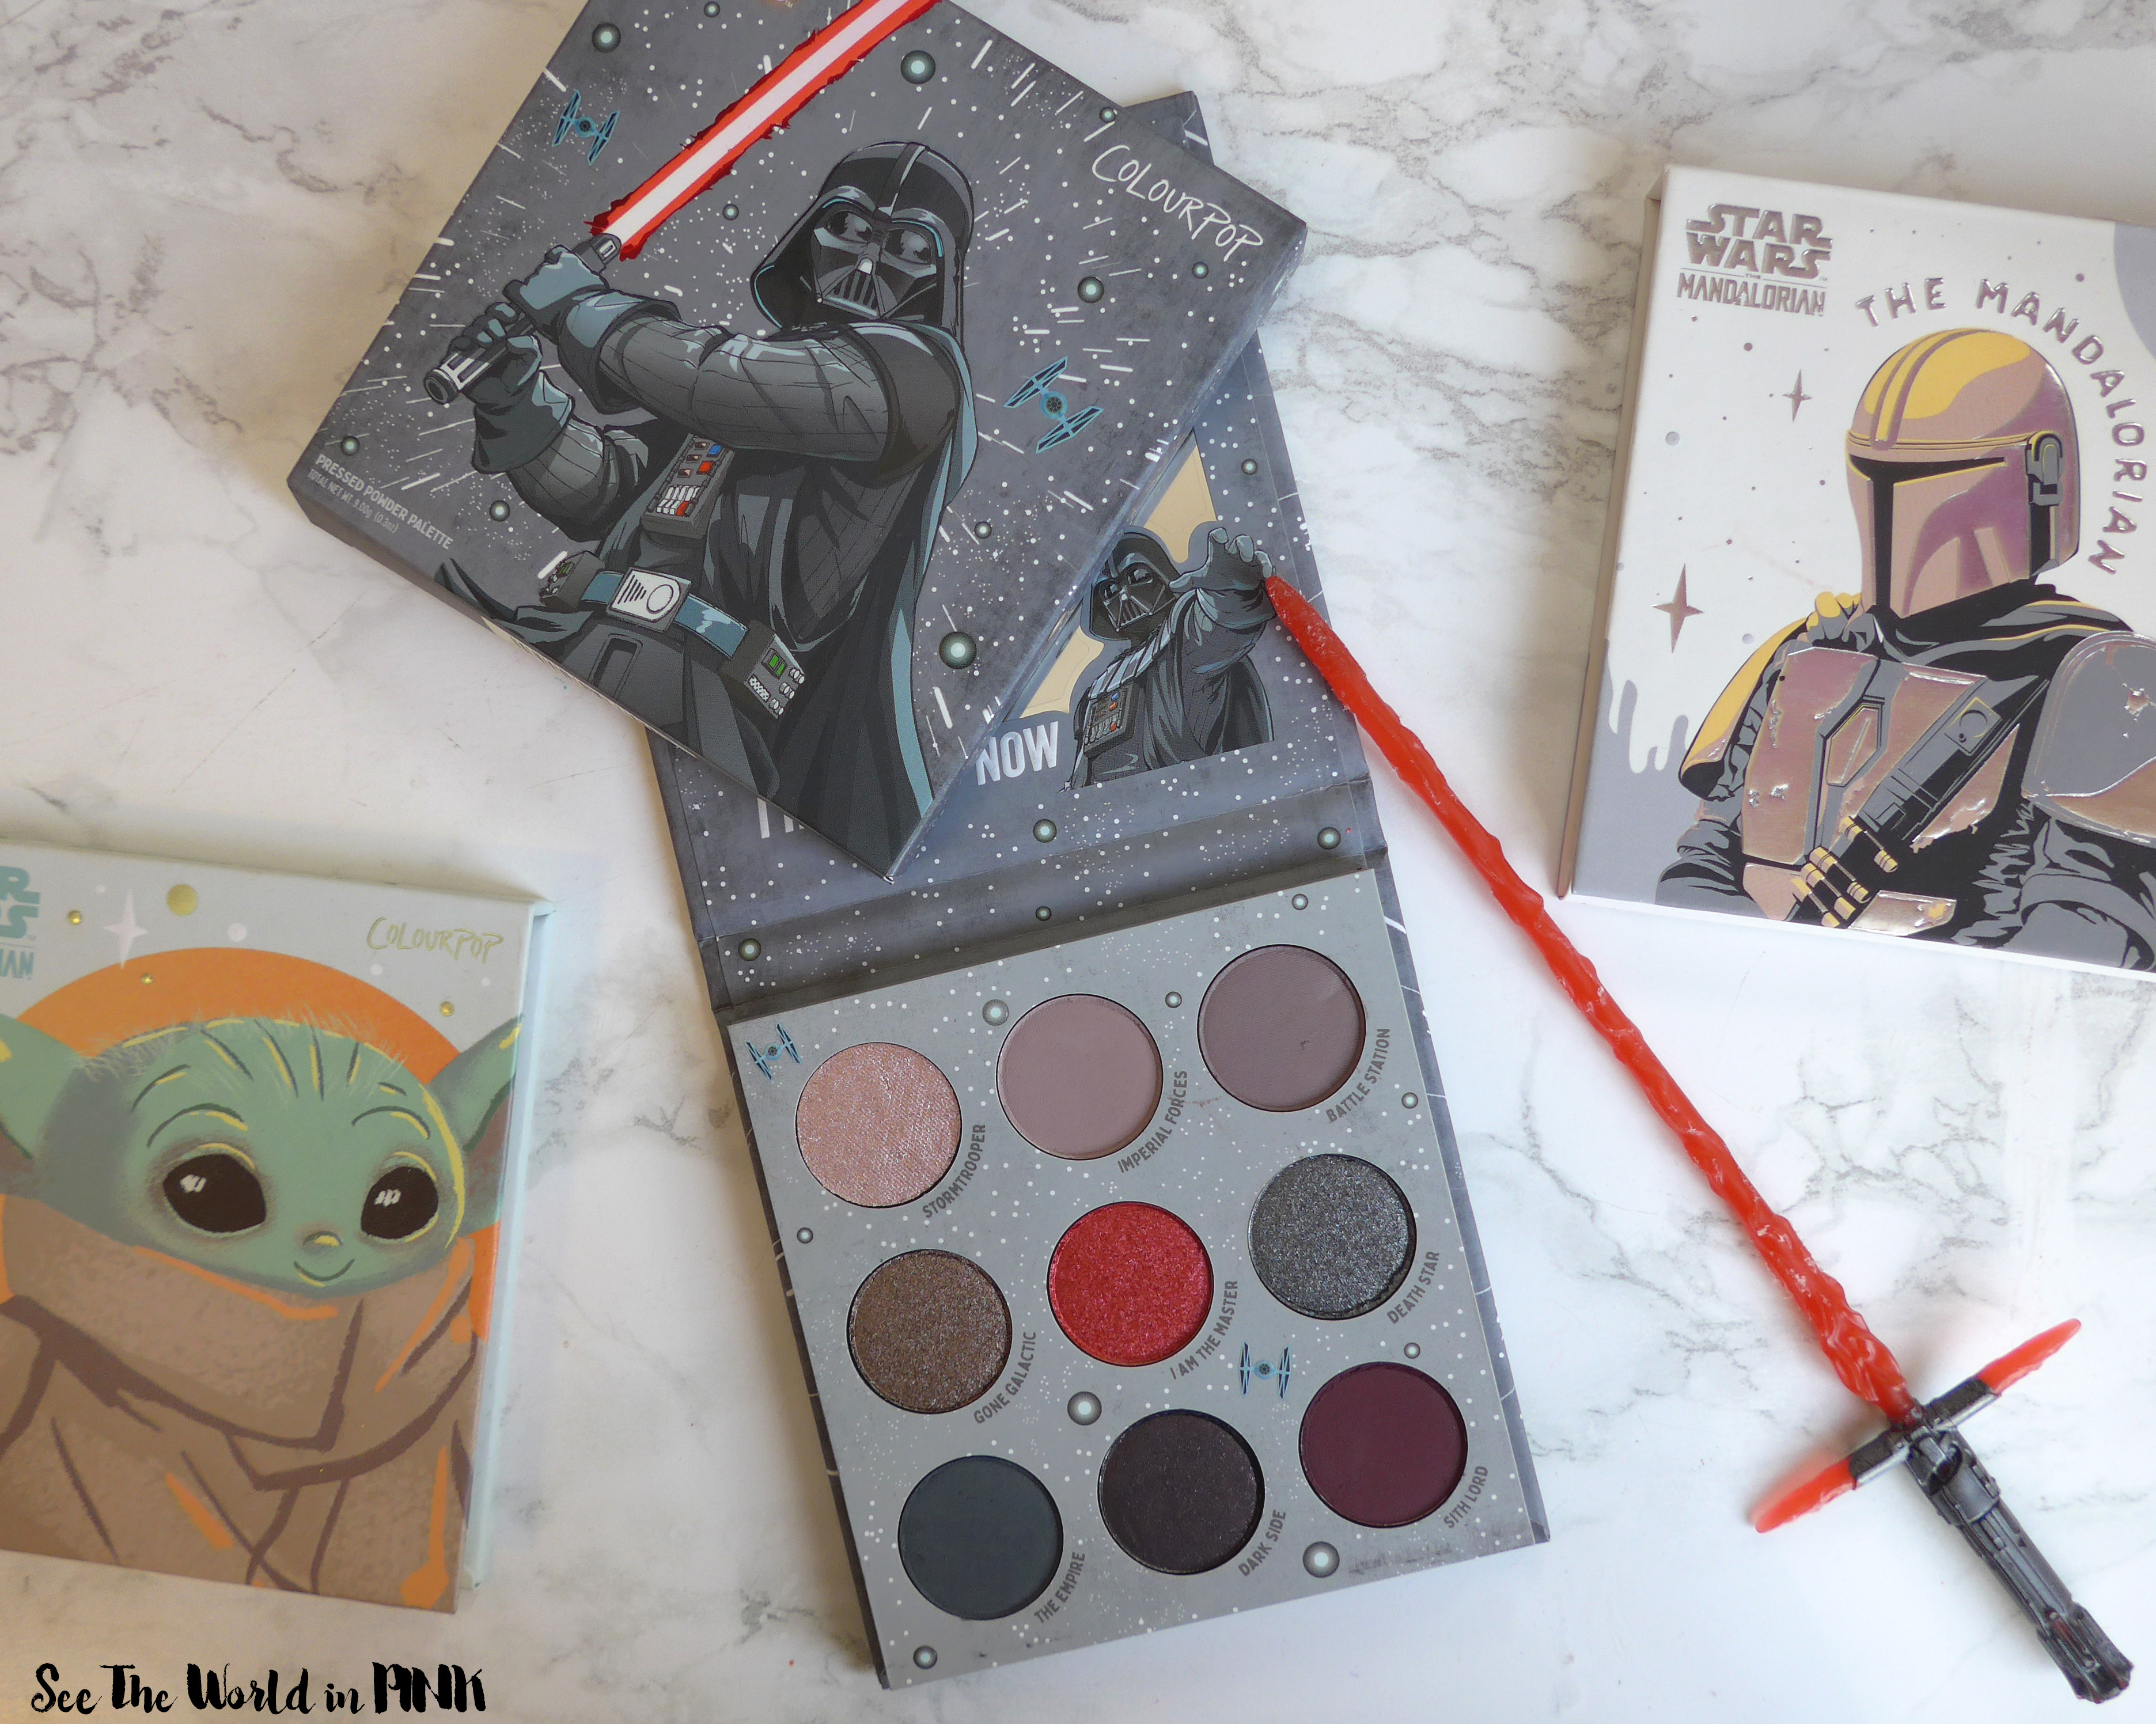 ColourPop Darth Vader Pressed Powder Shadow - Swatches, Looks and Thoughts